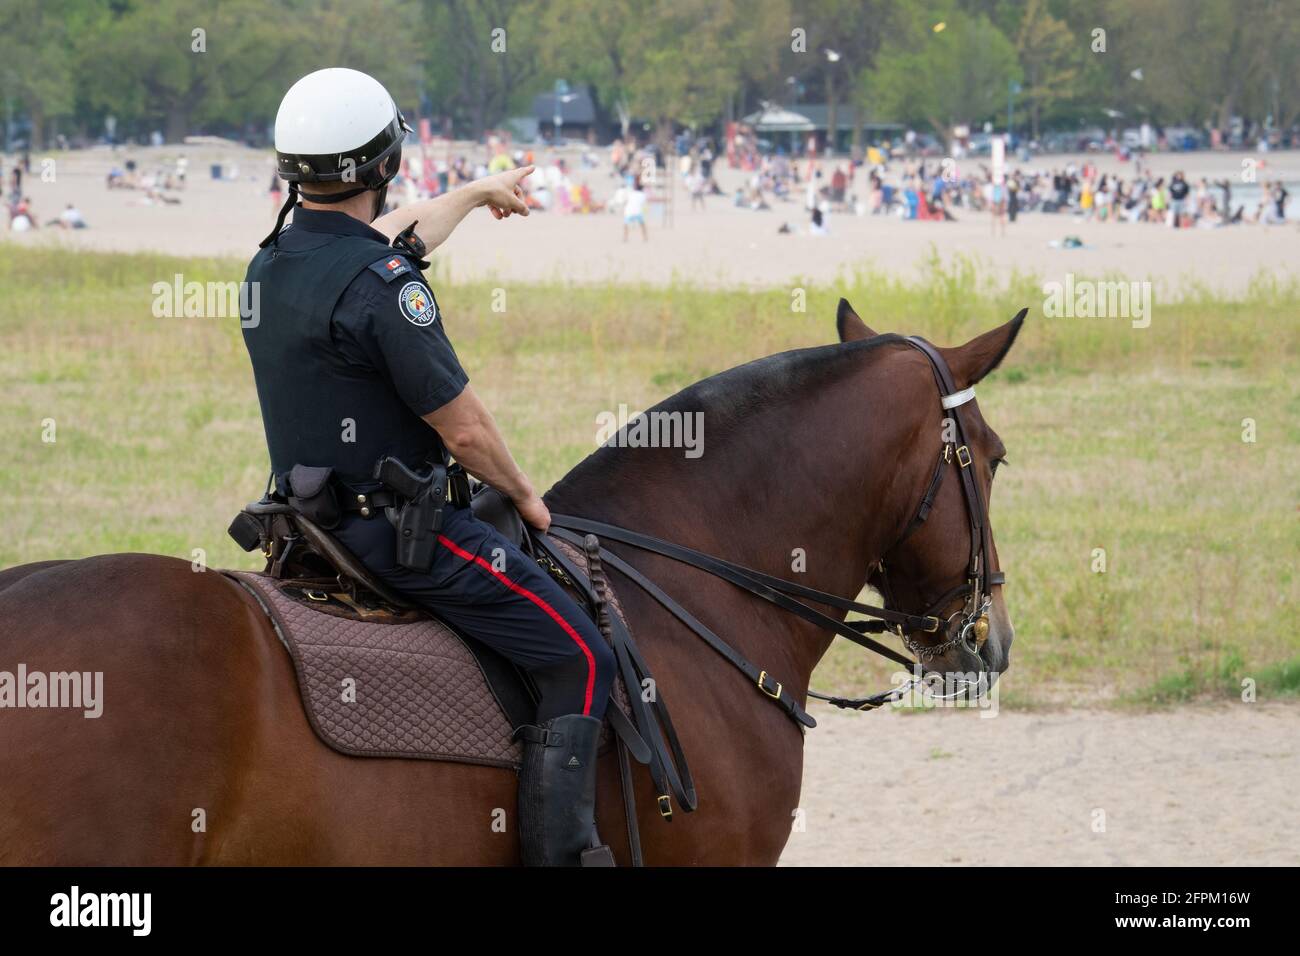 While the province was under a stay-at-home order due to COVID-19, a mounted police officer points at a crowded Woodbine Beach in Toronto, Ontario. Stock Photo